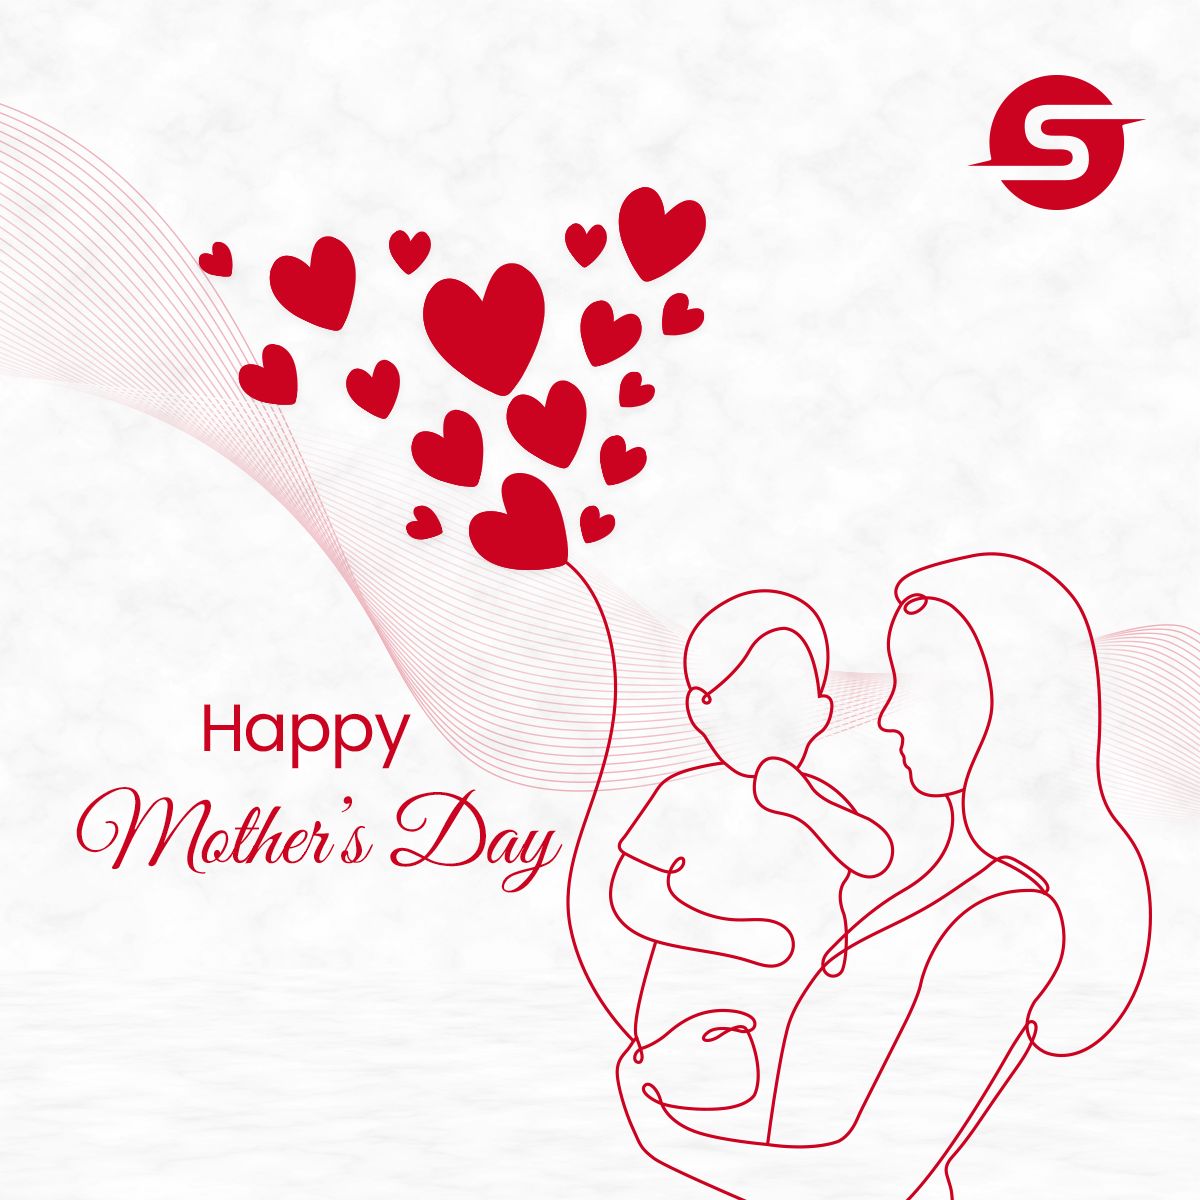 Wishing all the incredible mothers out there a day filled with love, joy, and appreciation. Your endless sacrifices and unconditional love make the world a better place. Happy Mother's Day! 💐❤ #MothersDay